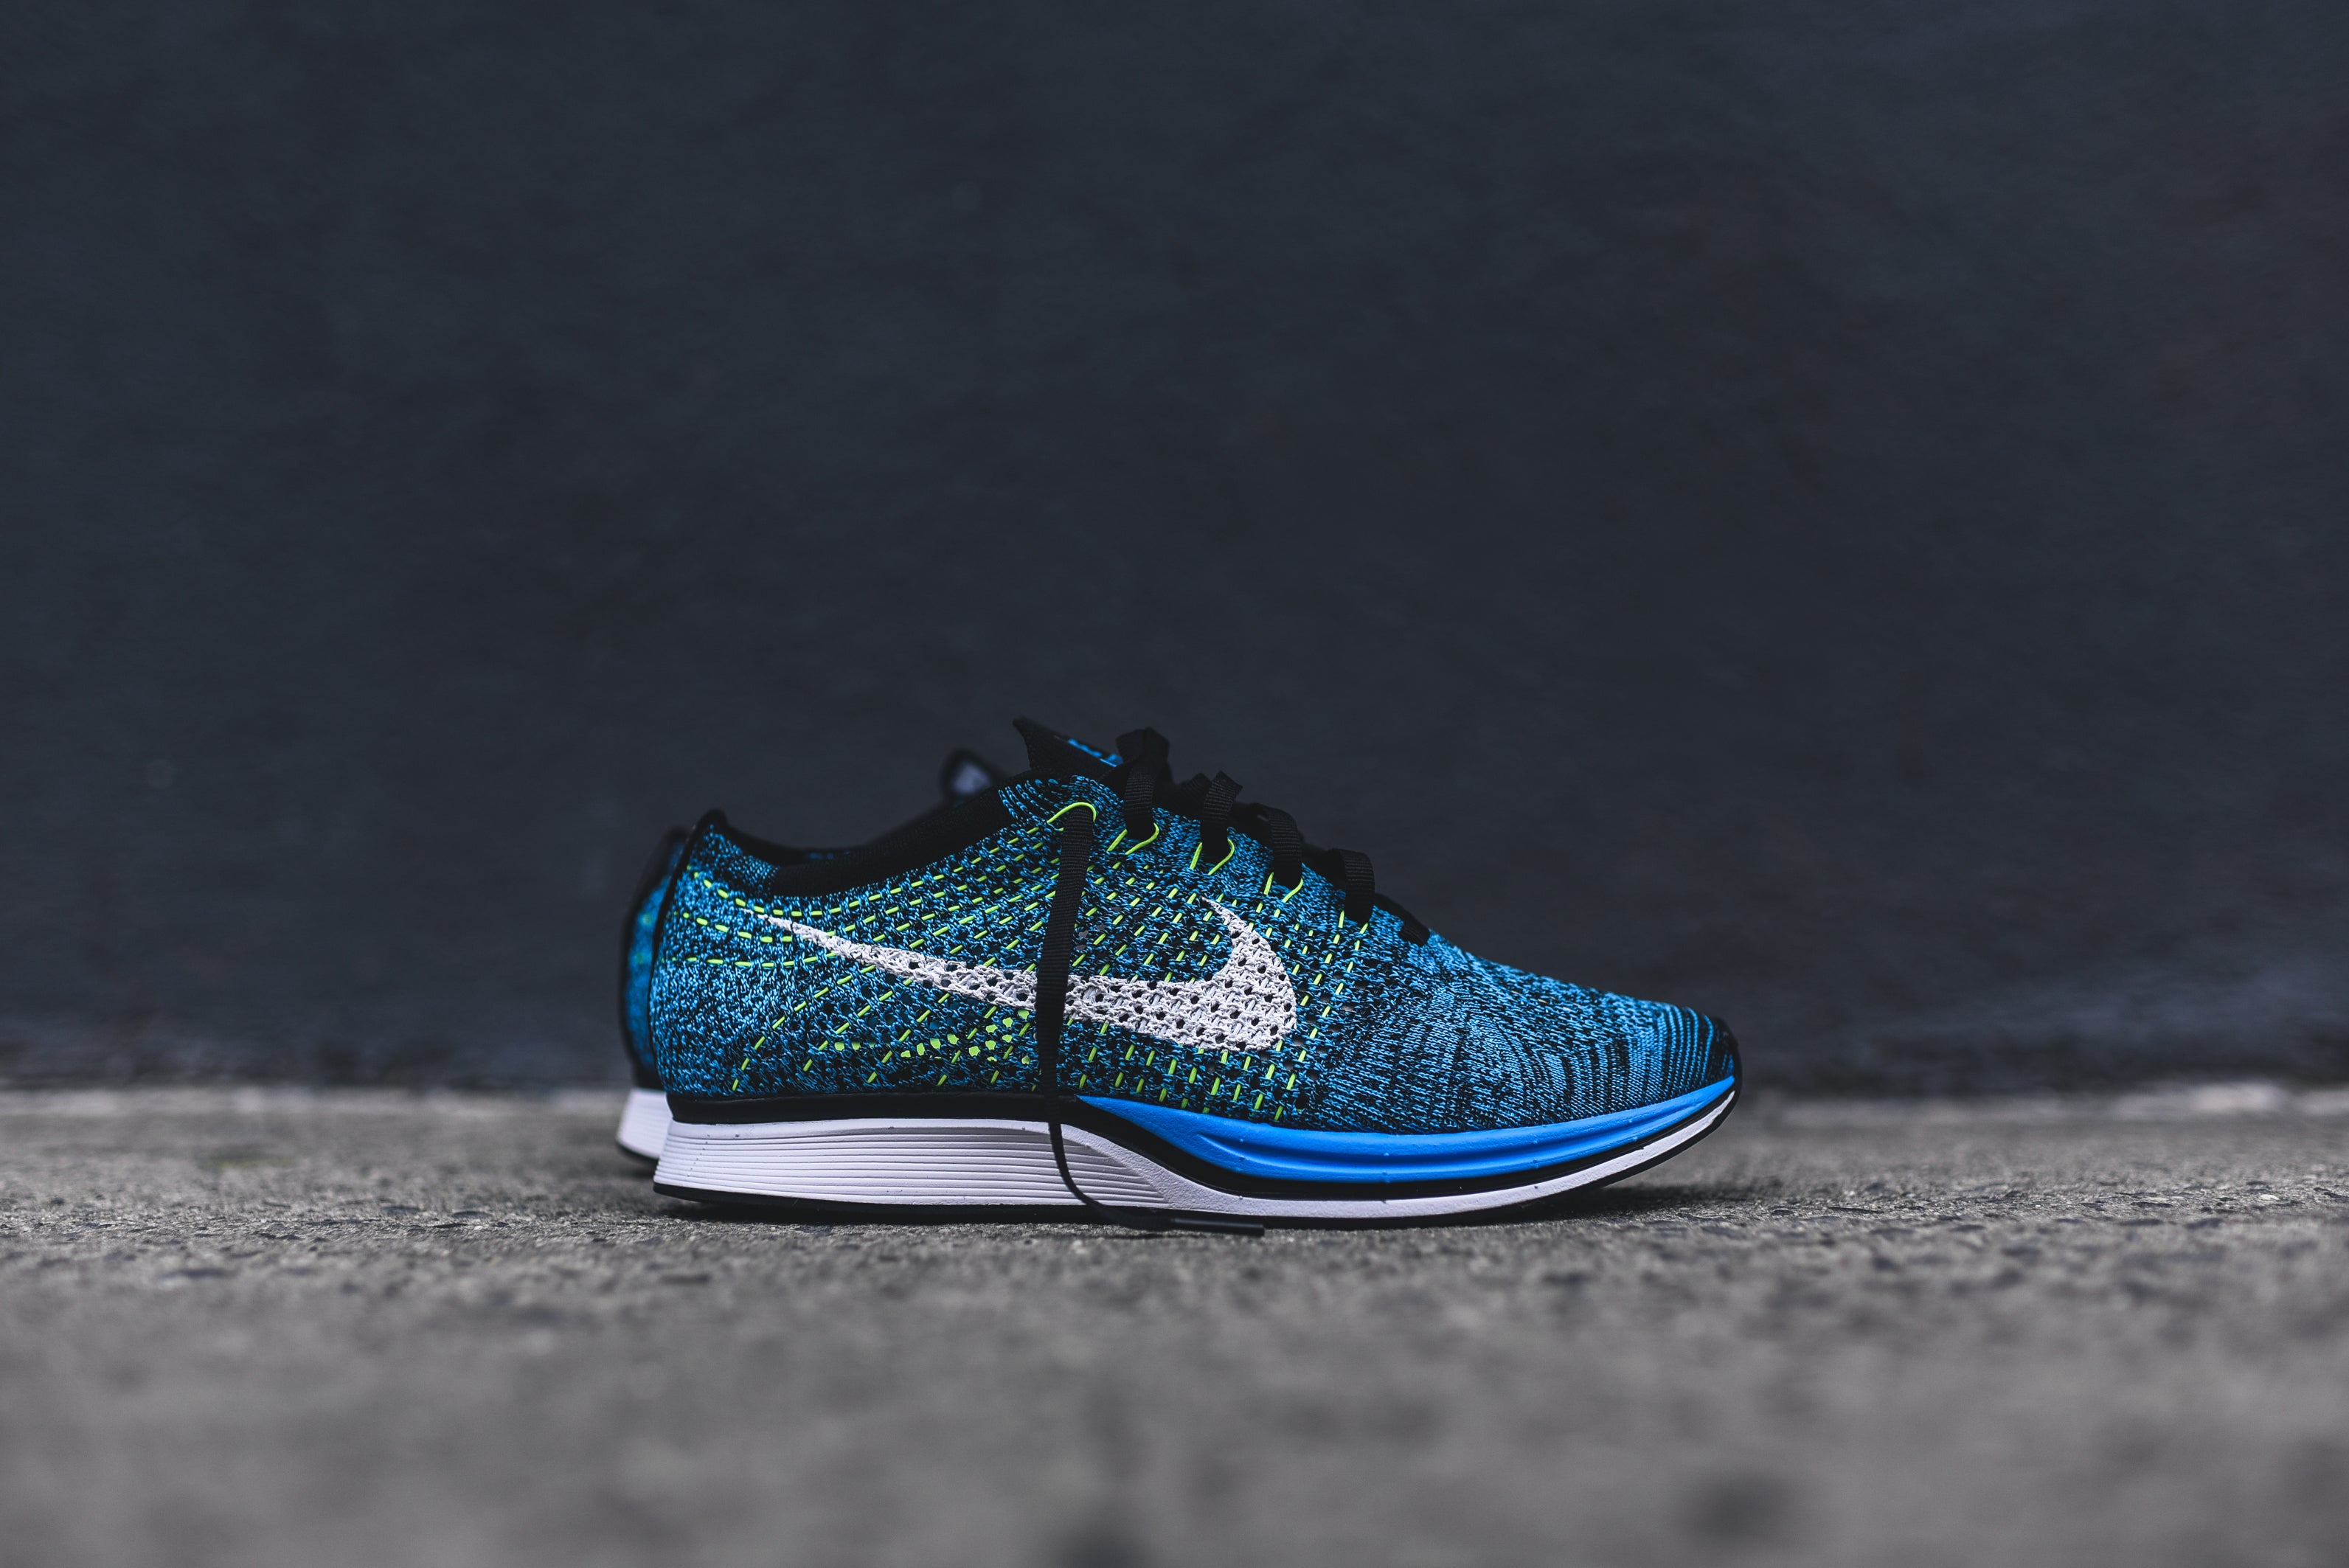 análisis realce Florecer Nike Flyknit Racer - Blue Glow – Kith